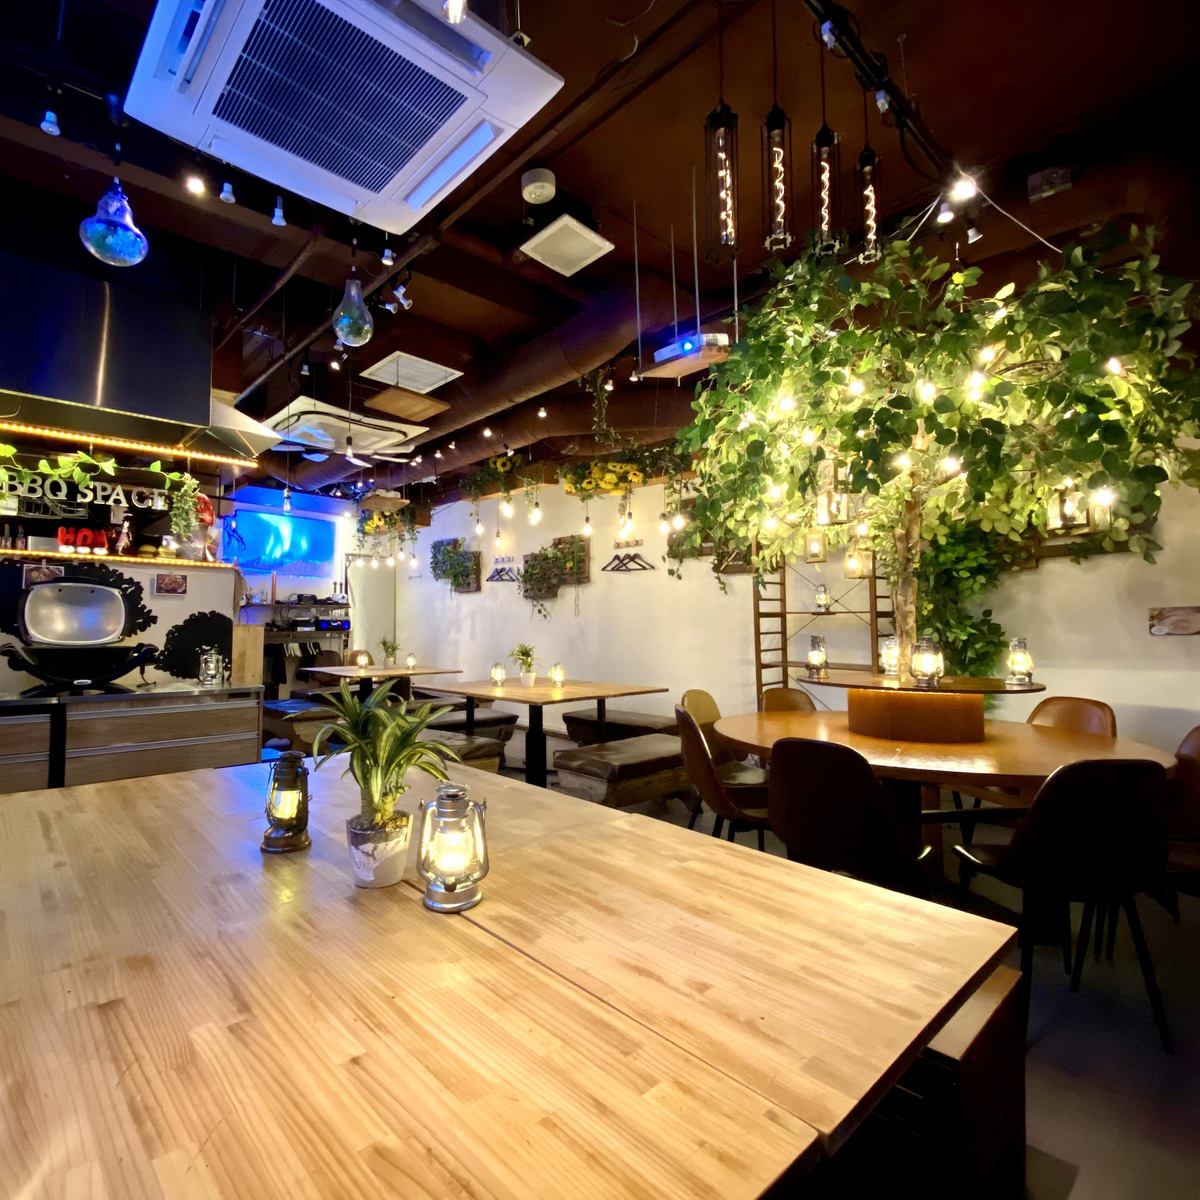 At our affiliated stores in the Shibuya area, we offer a variety of private parties for both small and large groups!All stores have a wide variety of special rental benefits, including microphones, projectors, and audio equipment!